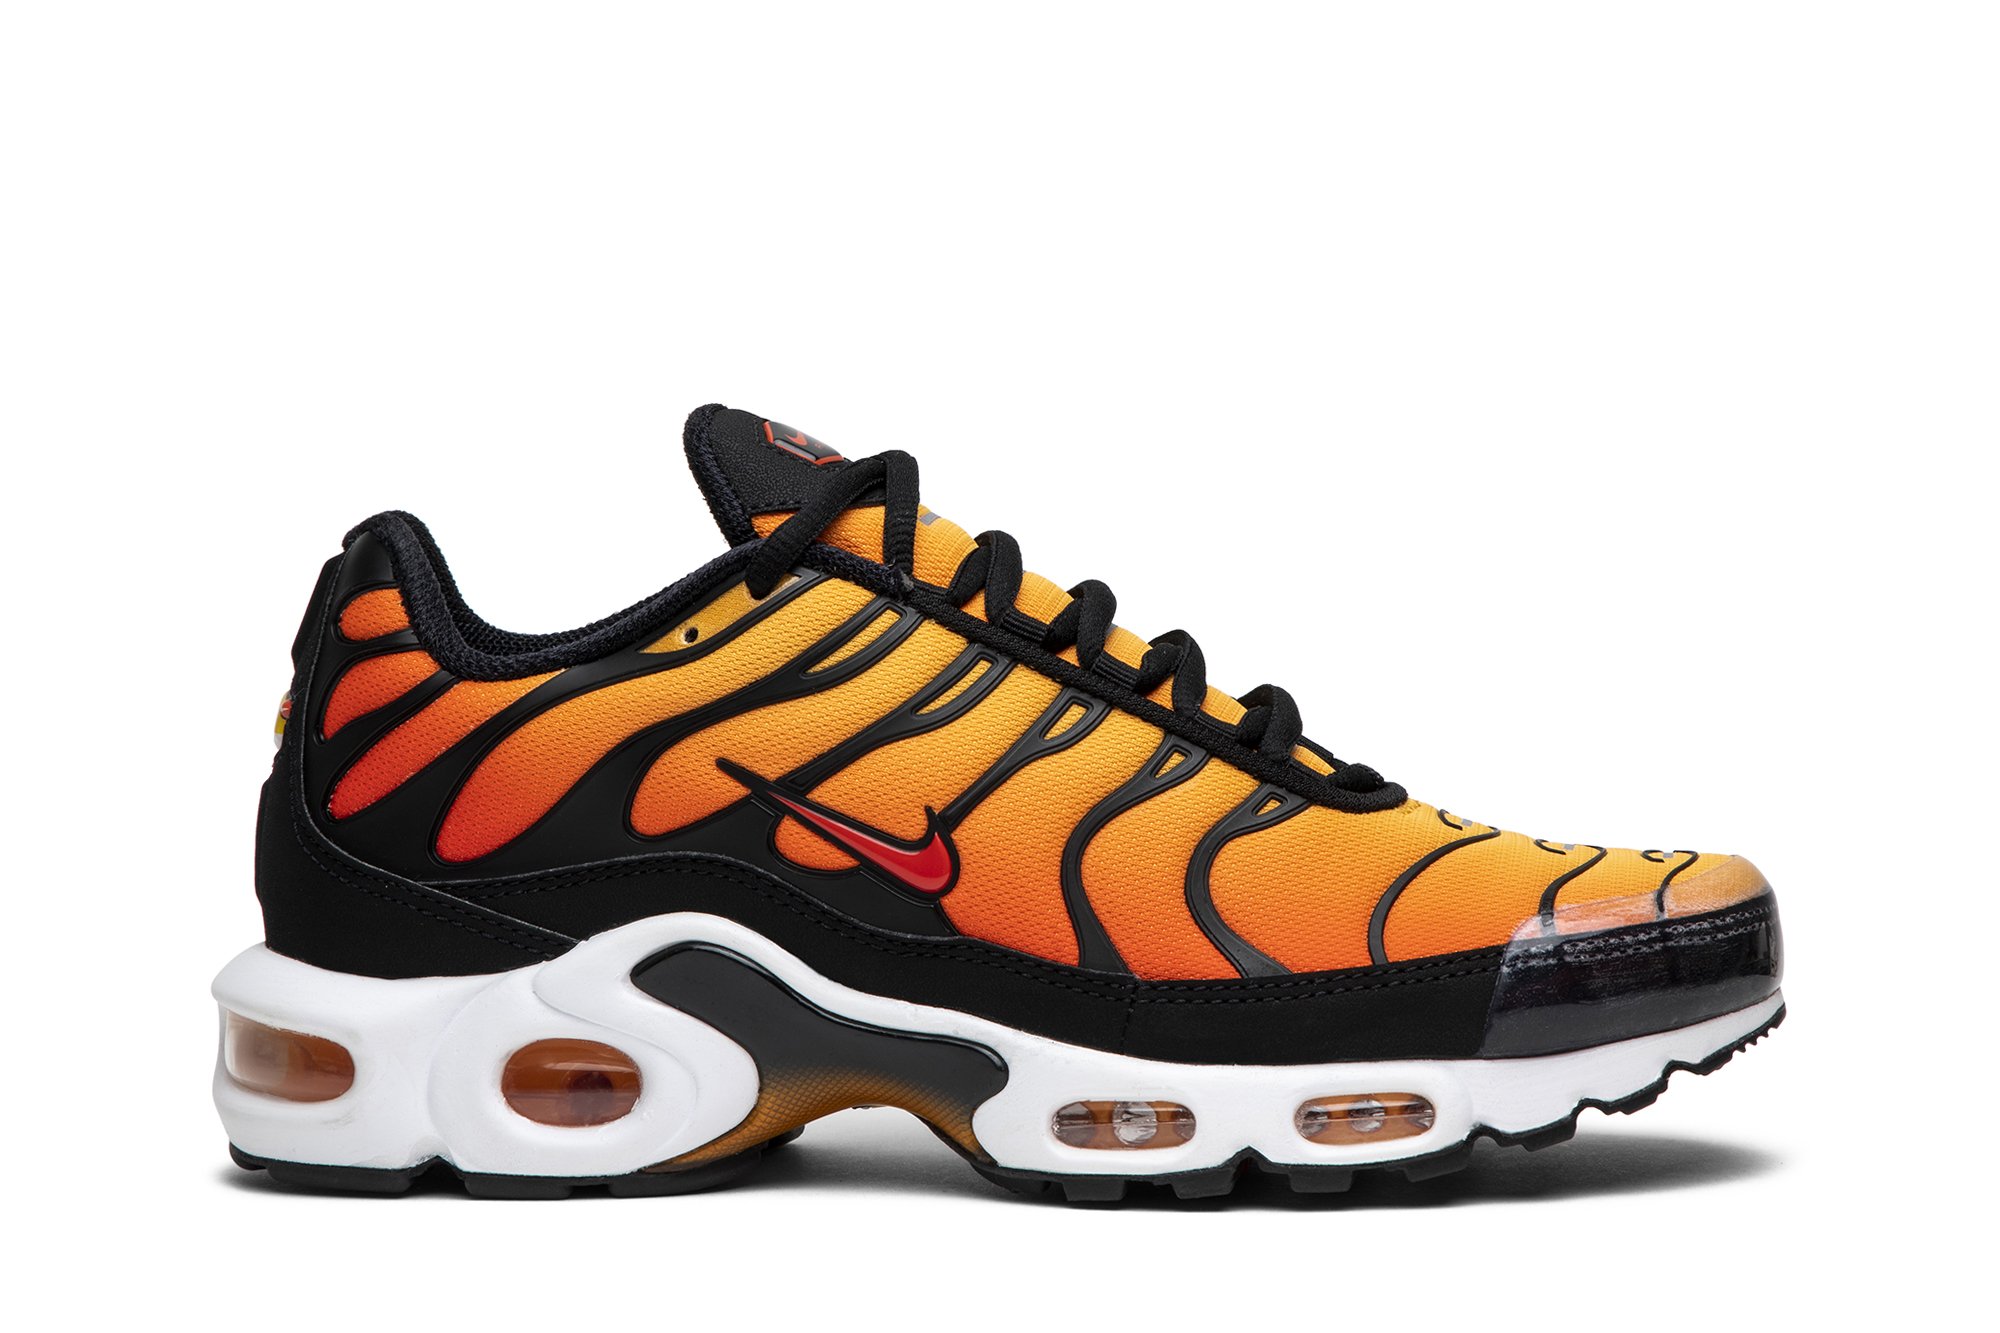 sunset tns for sale